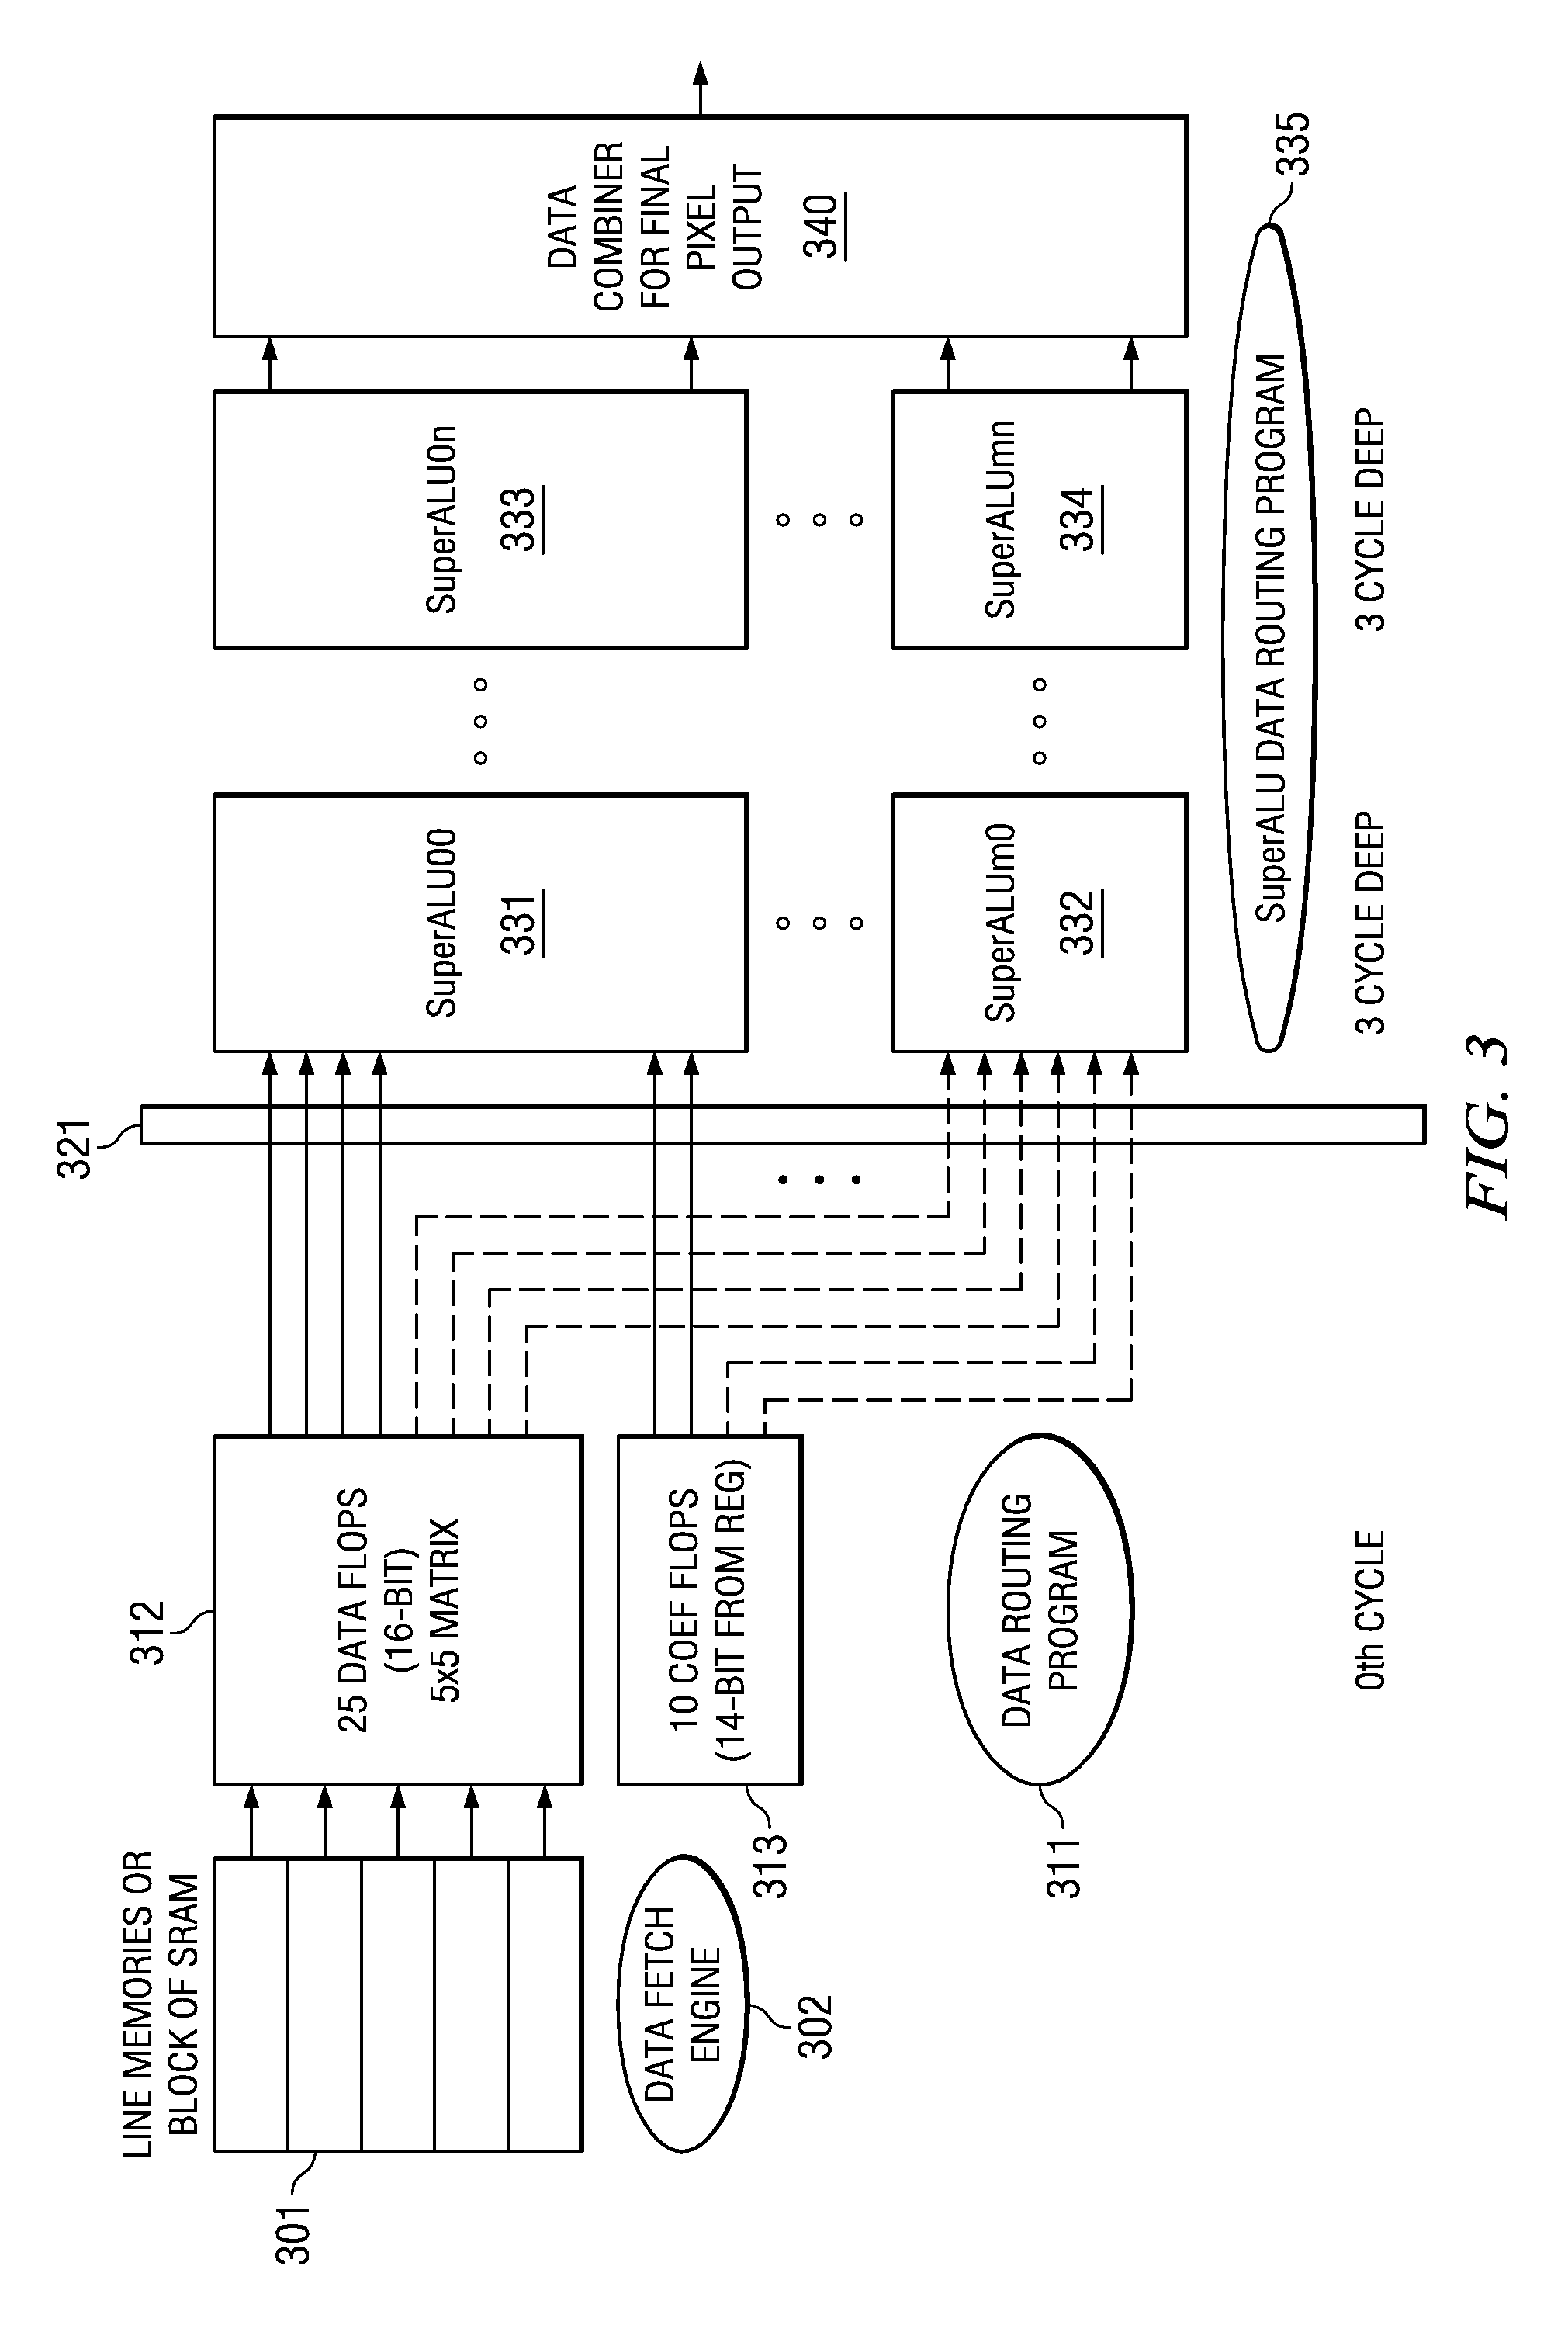 Programmable architecture for flexible camera image pipe processing